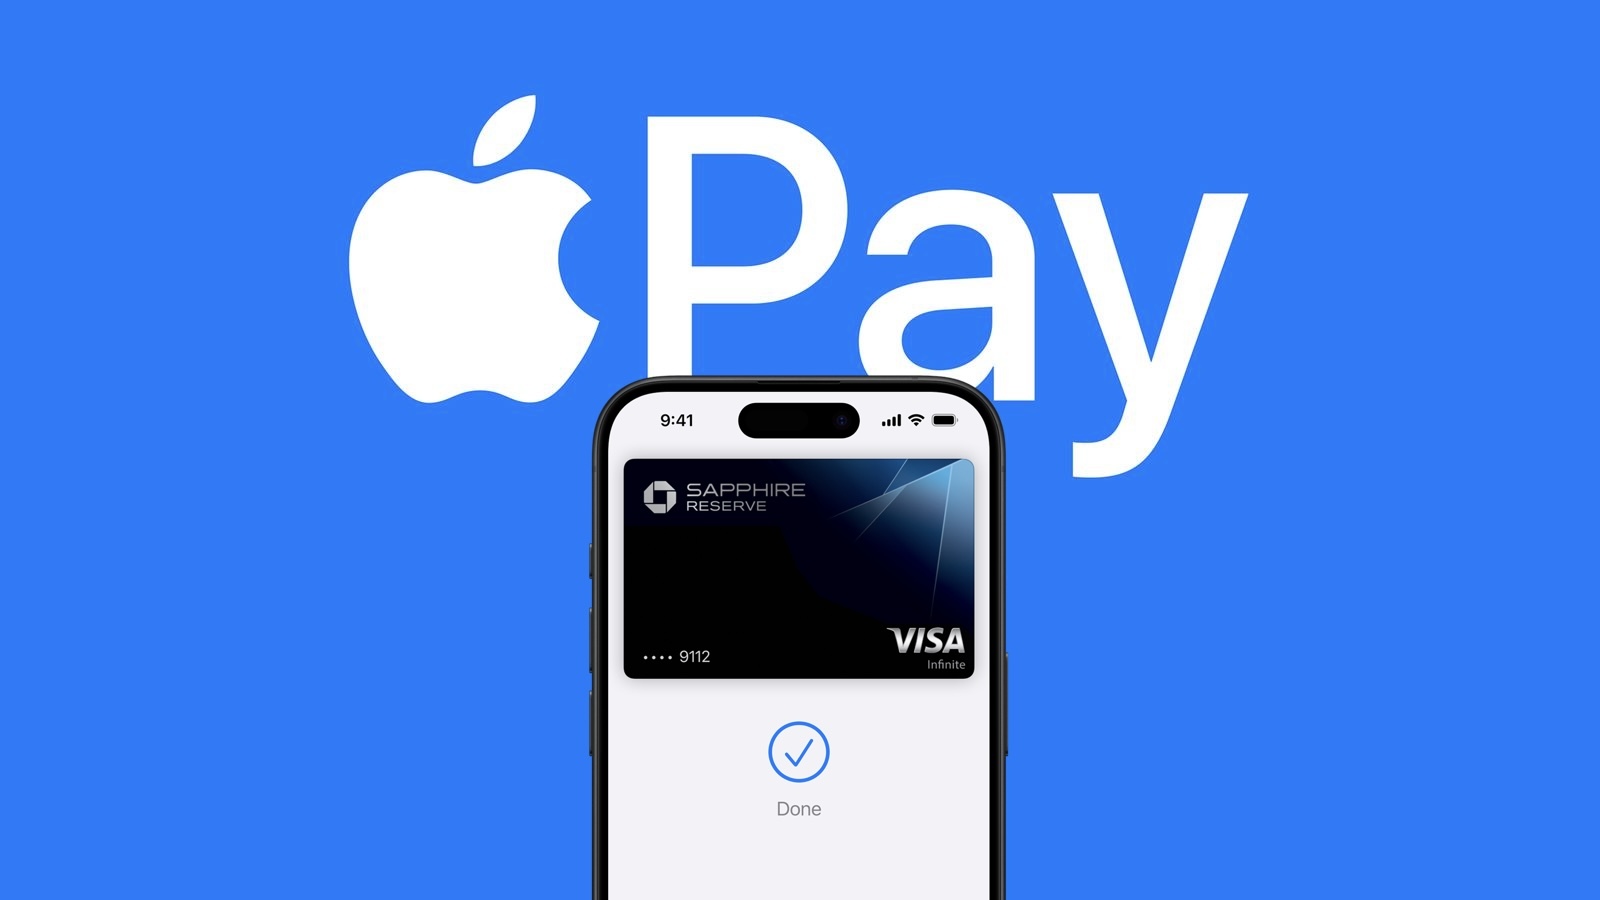 European Regulators Will Soon Approve Apple’s Plan to Open Up Tap-to-Pay to Banks and Payment Providers